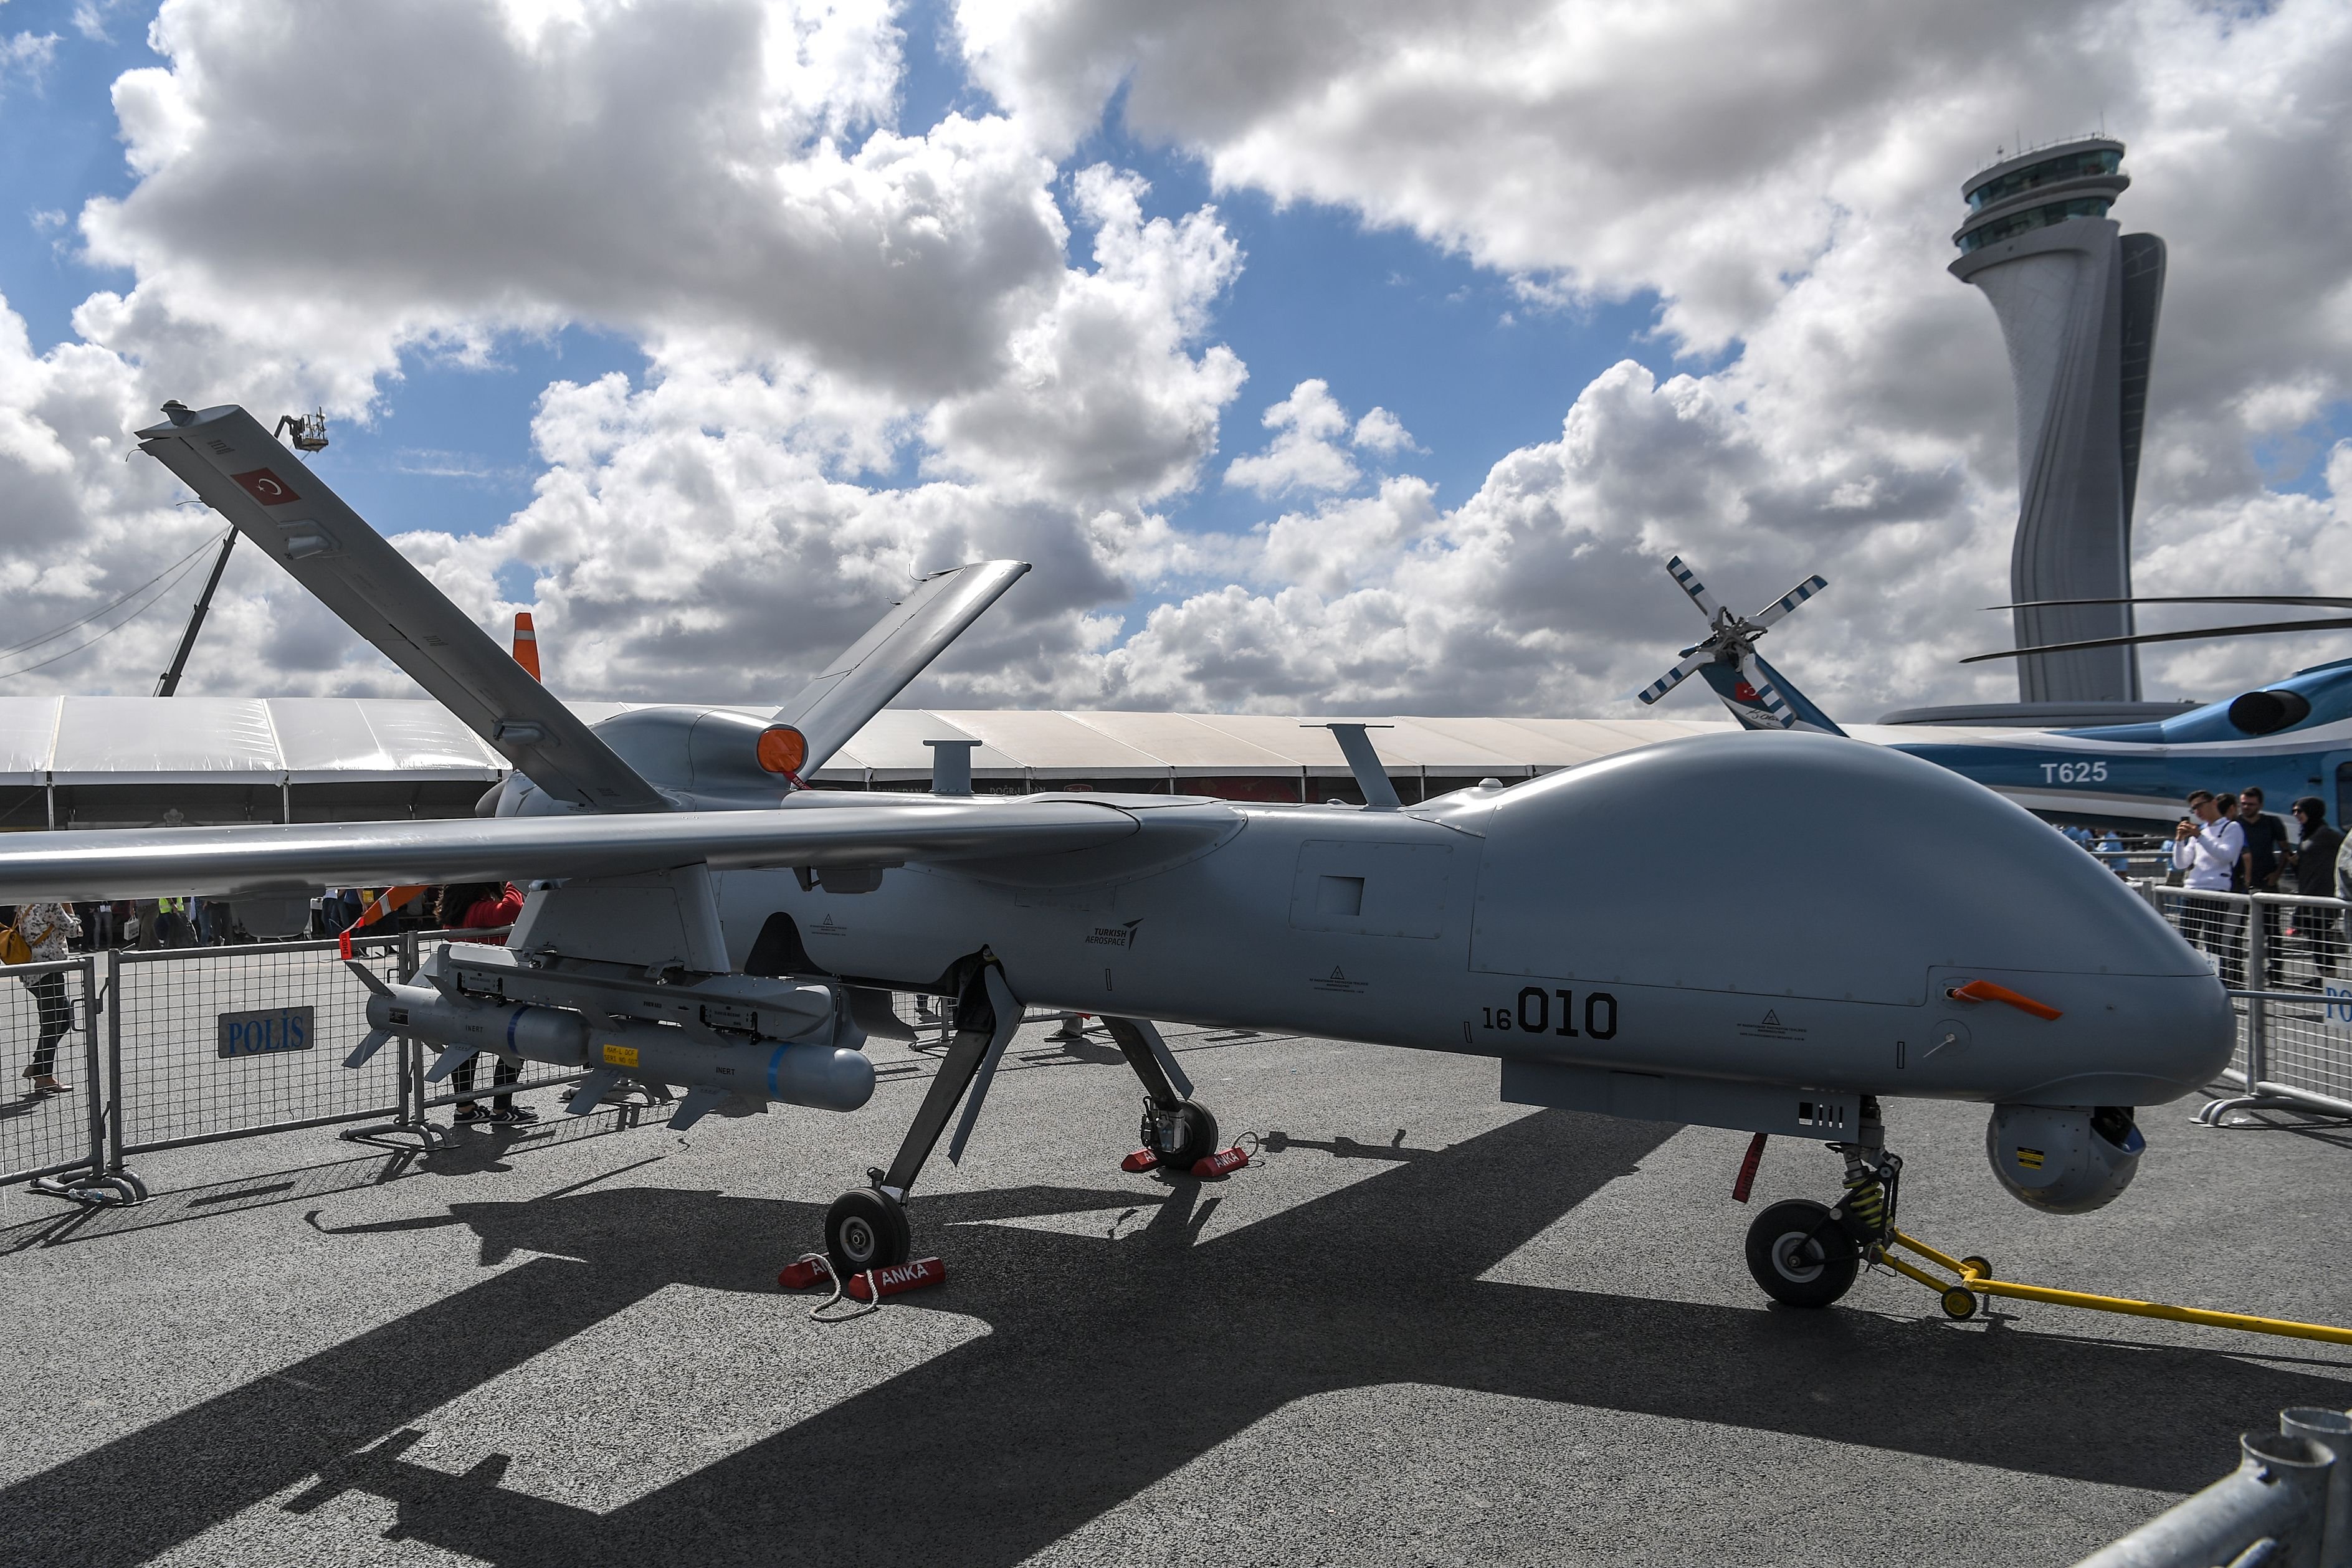 The unmanned aerial vehicle ANKA is displayed during the Teknofest festival at Istanbul Airport, Sept. 20, 2018. (AFP Photo)